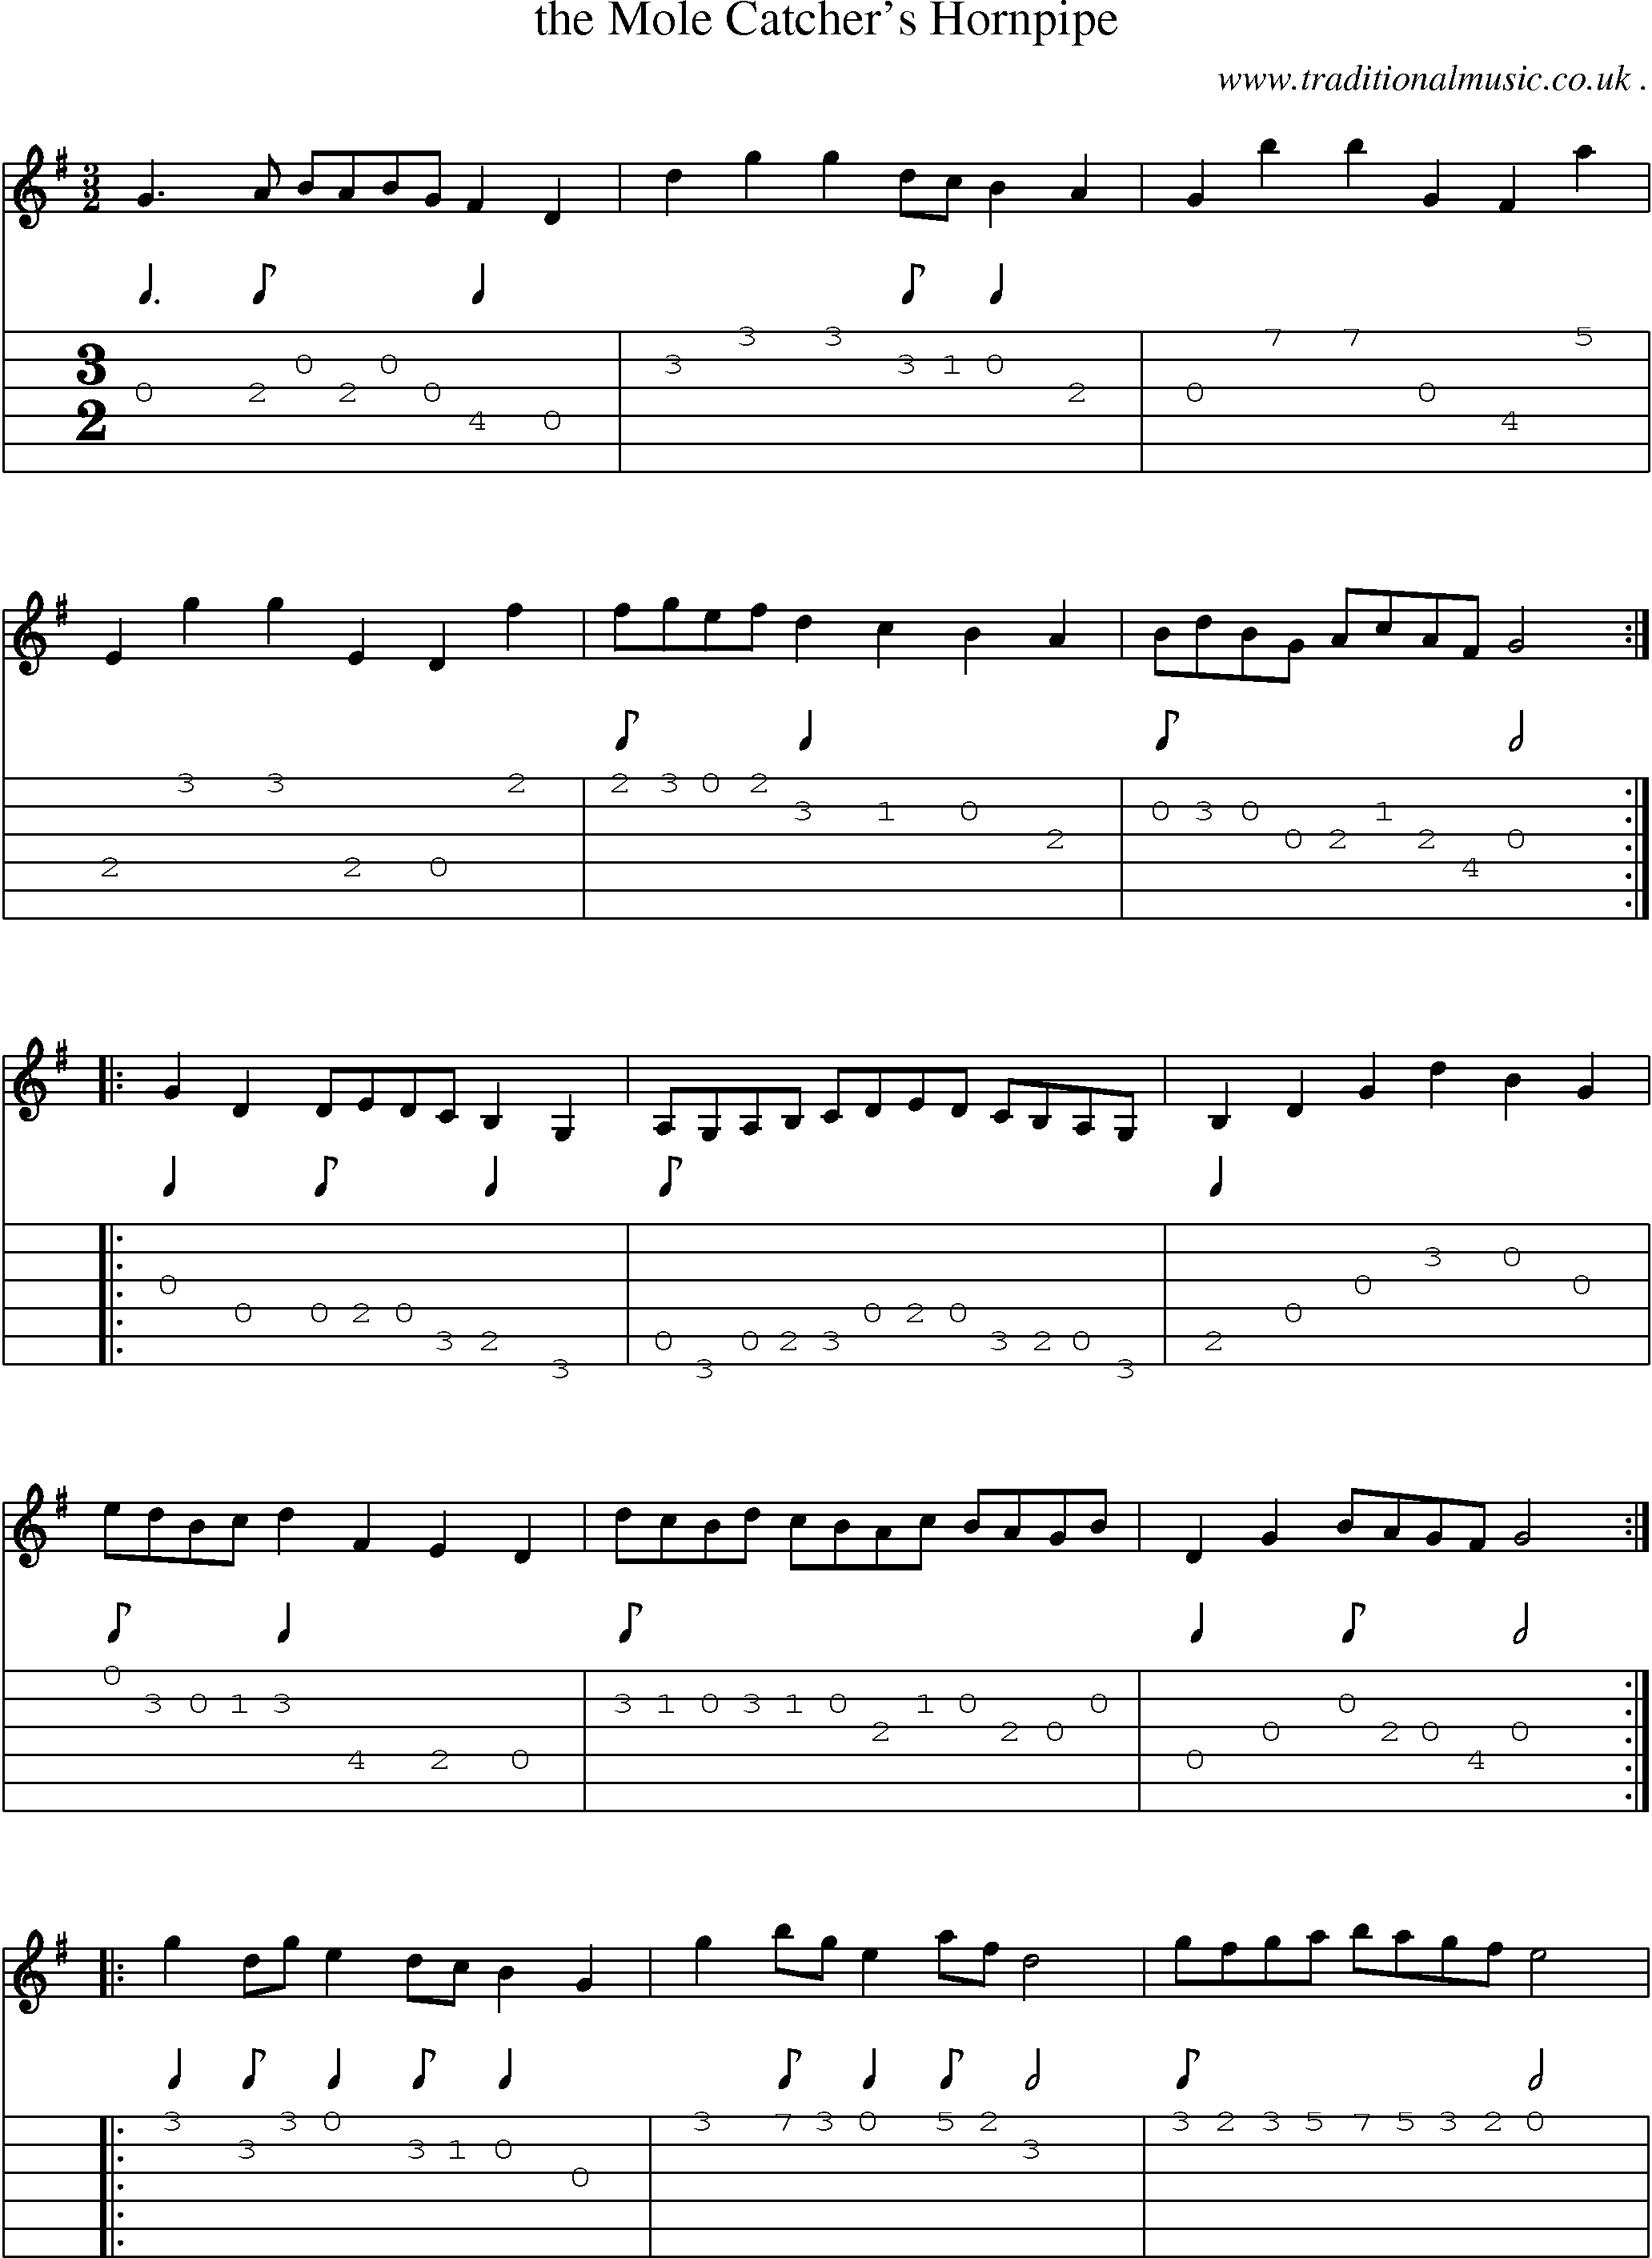 Sheet-Music and Guitar Tabs for The Mole Catchers Hornpipe